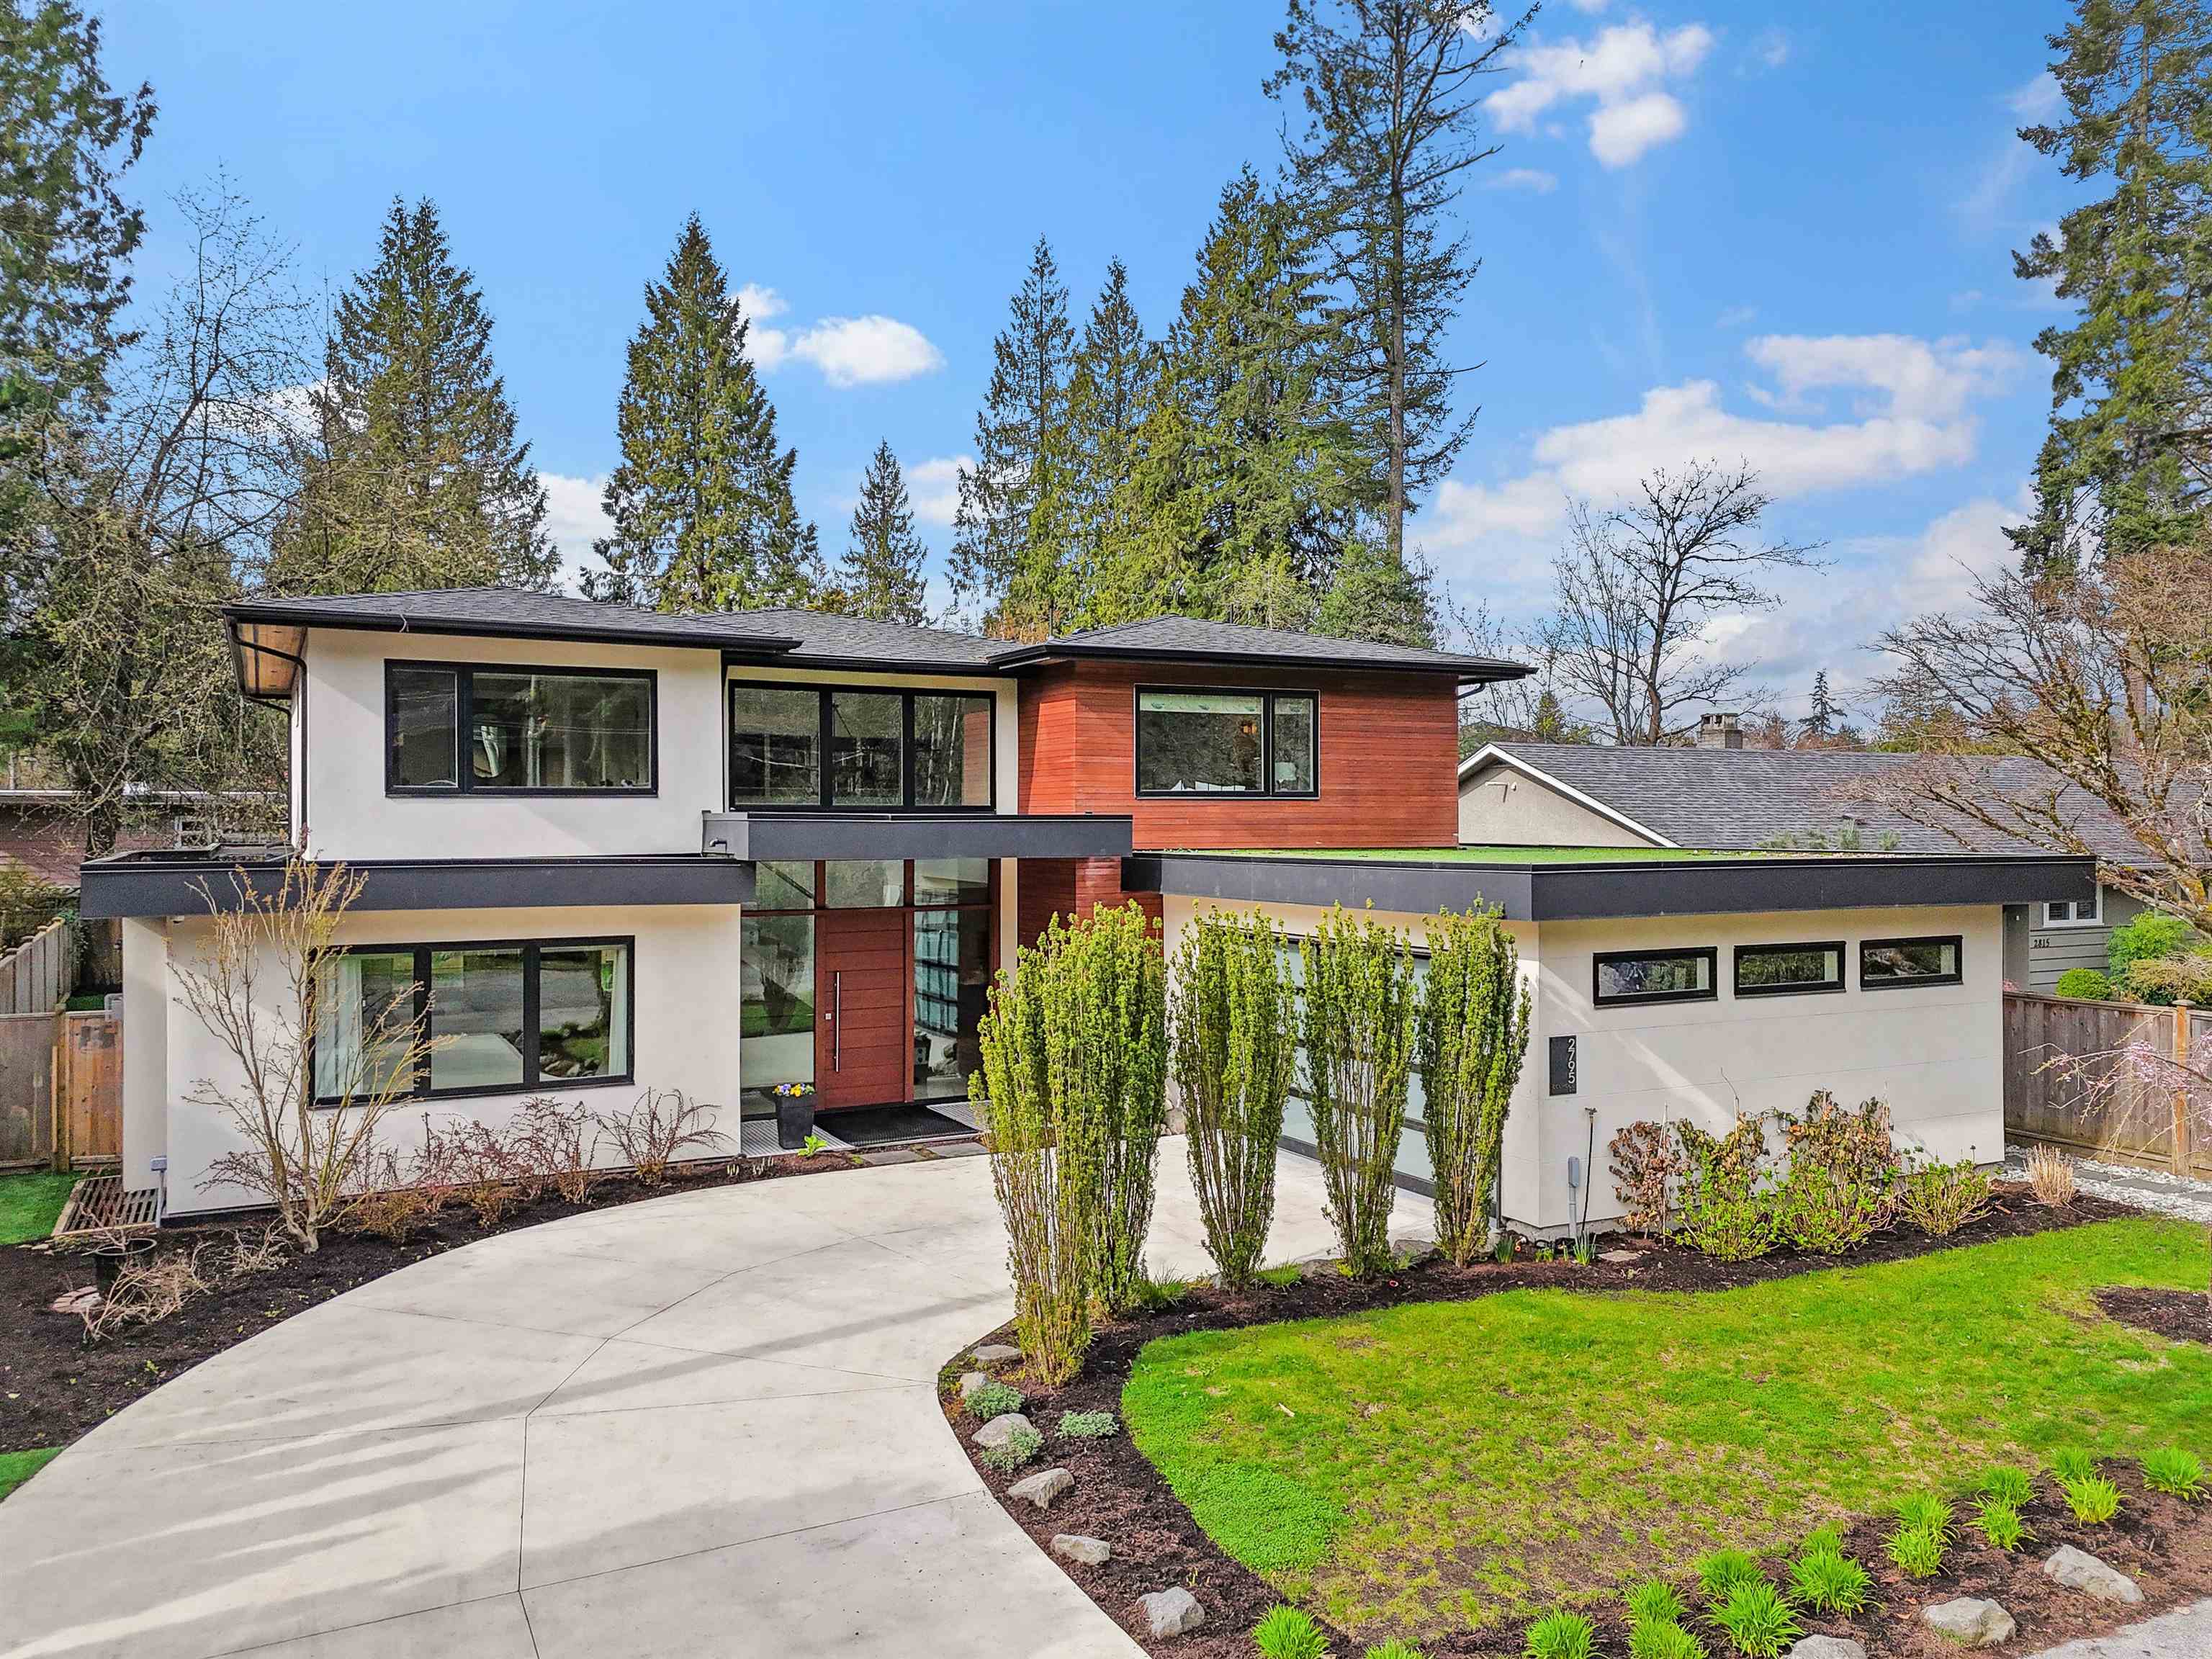 Listing image of 2795 COLWOOD DRIVE